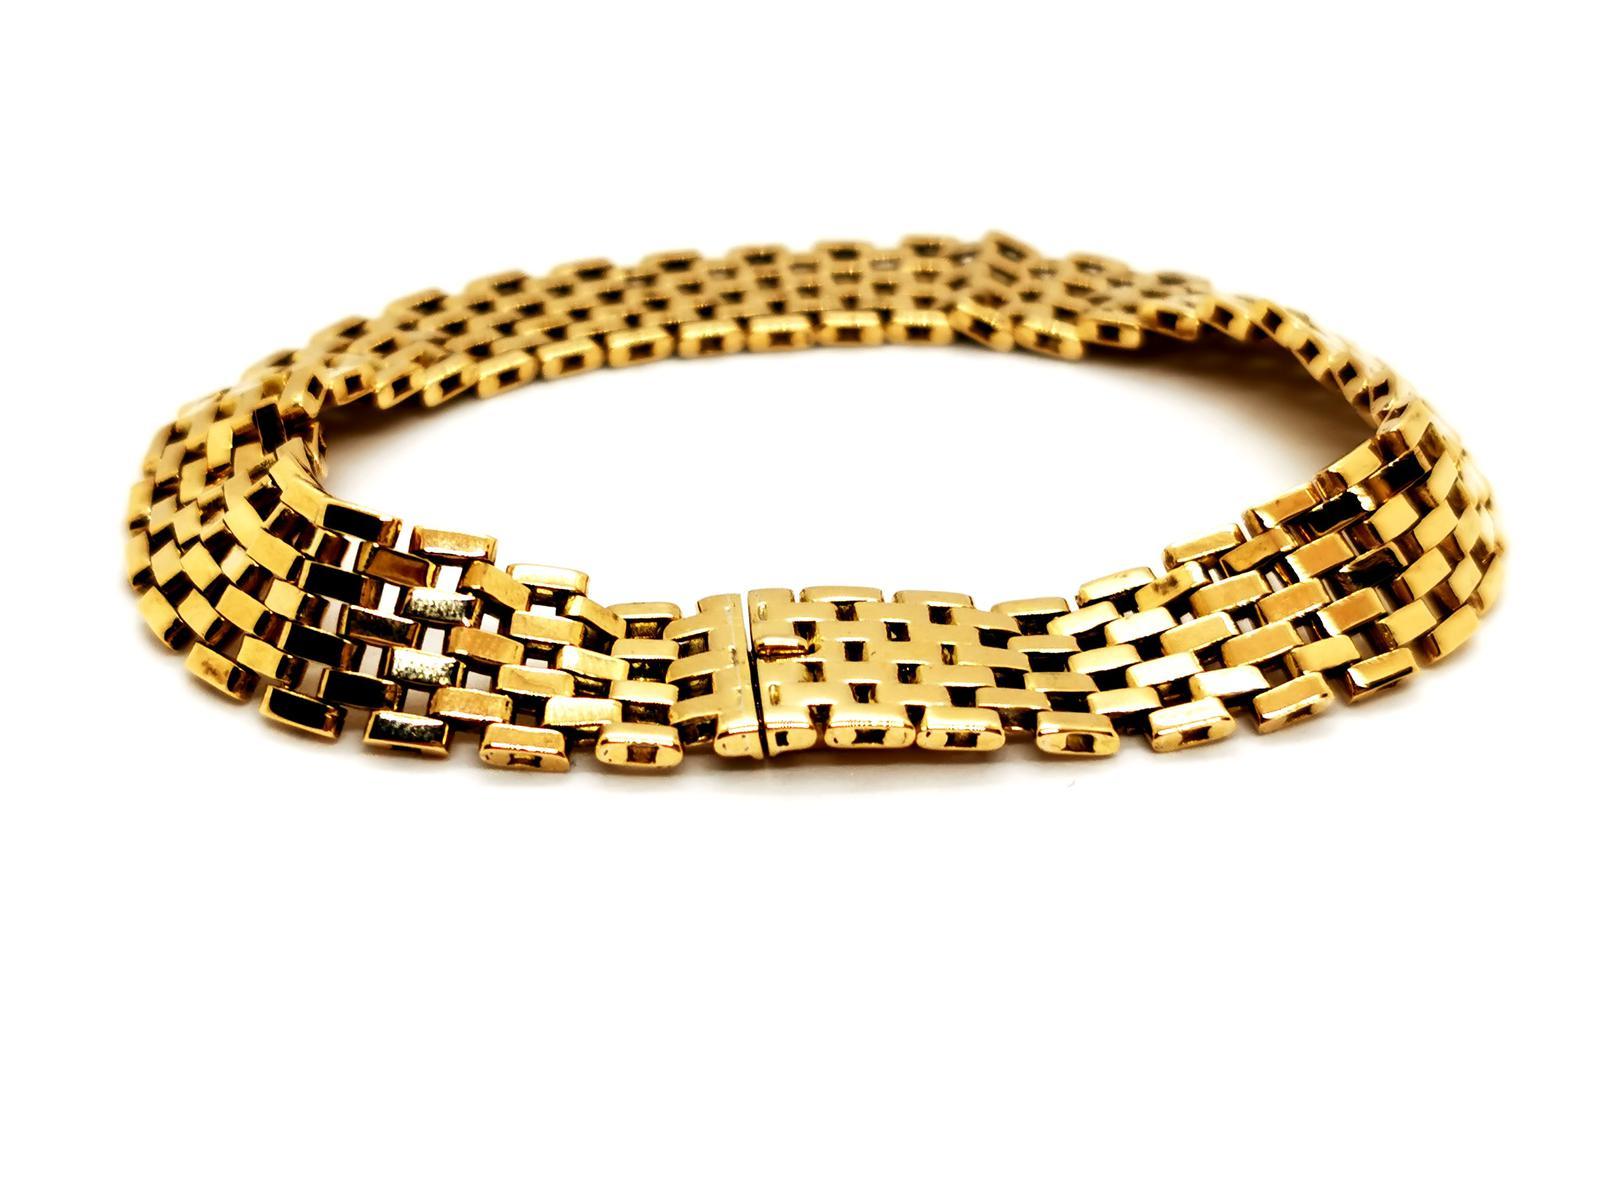 Bracelet wide golden yellow 750 mils (18K). composed of a succession of rectangular flat links. length: 17.5 cm. width: 1.24 cm. total weight: 23.81 g. eagle punch head. excellent condition.
